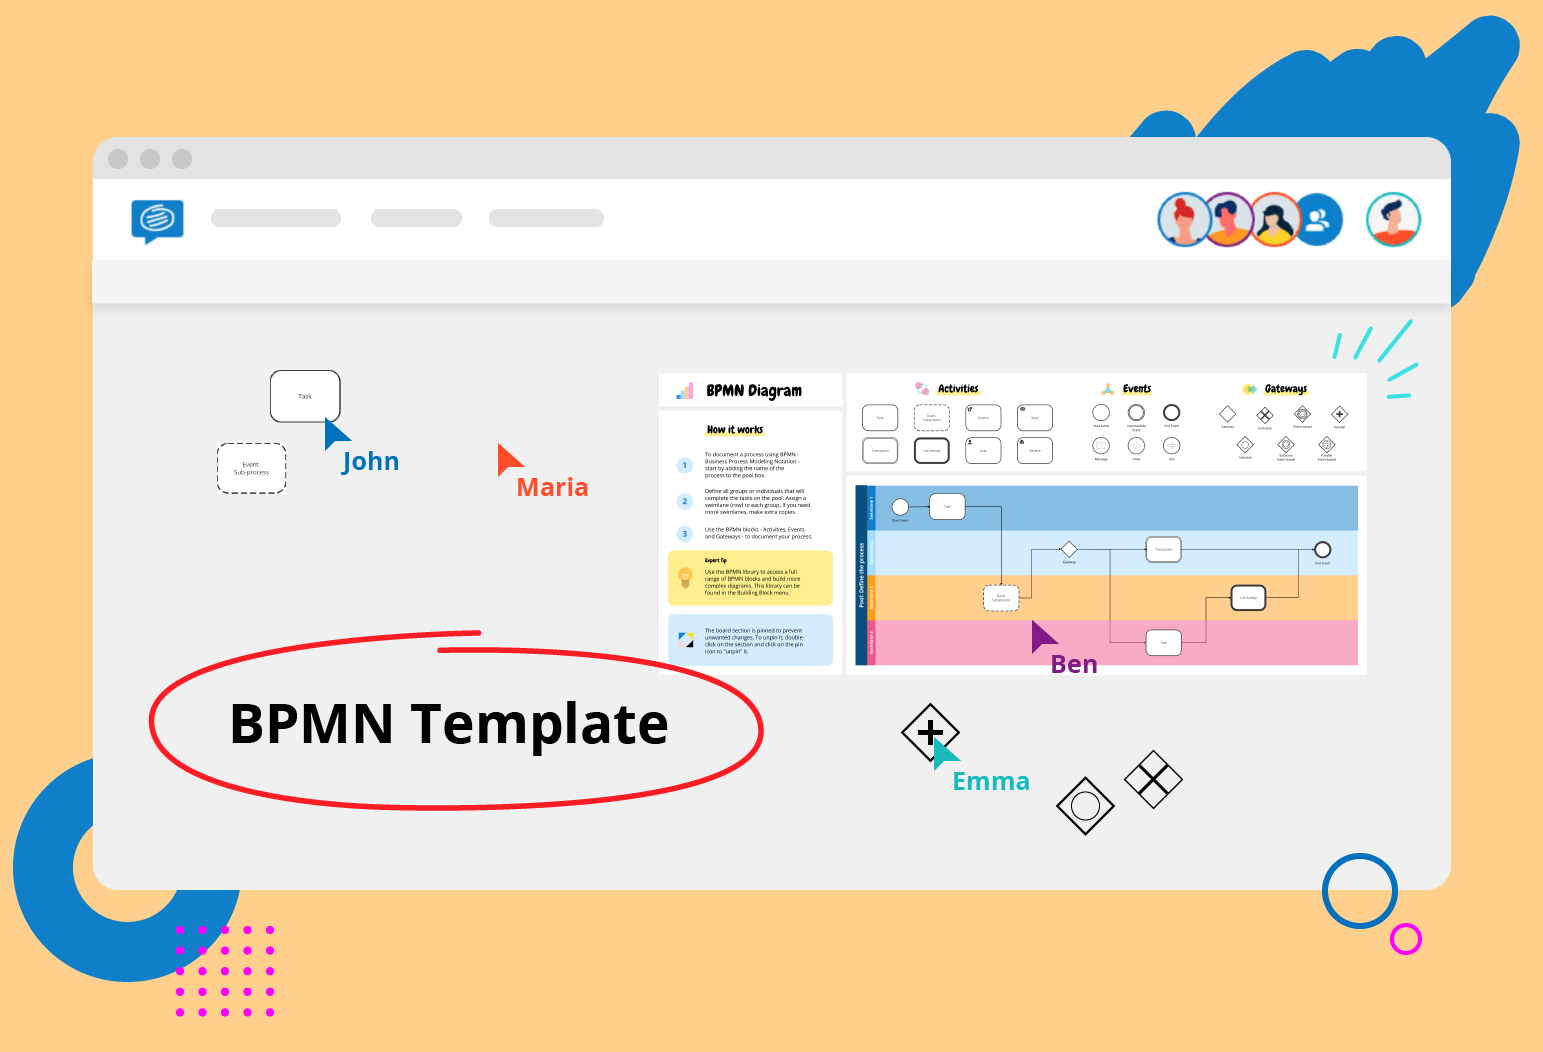 BPMN Diagram Template Conceptboard for modelling business processes